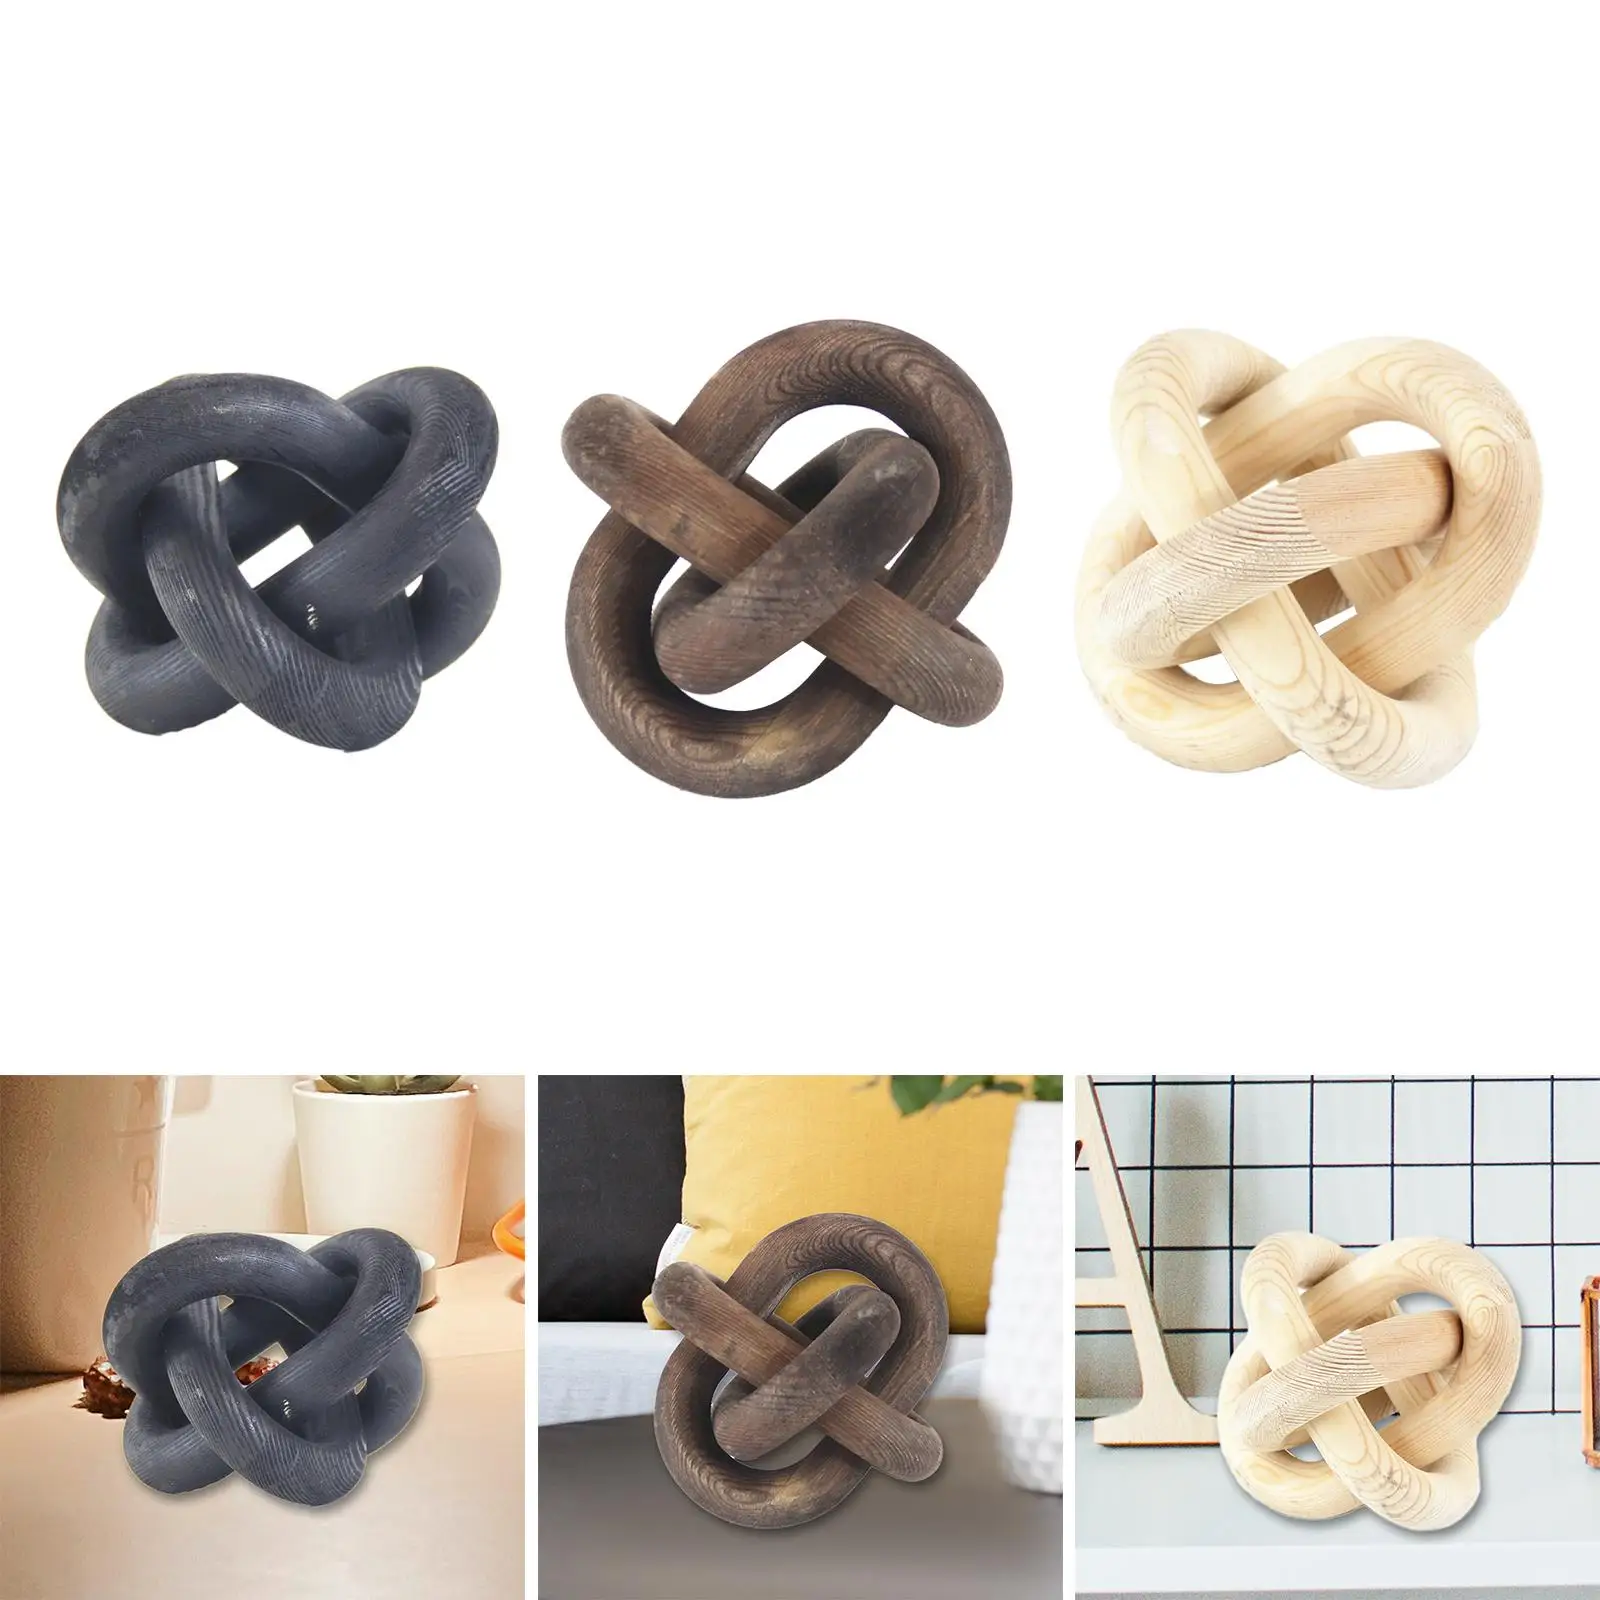 Wood Chain Decorations 3 Link Wooden Knot Durable Boho Style Decorative for Display Cabinet Desk Unique Appearance Rustic